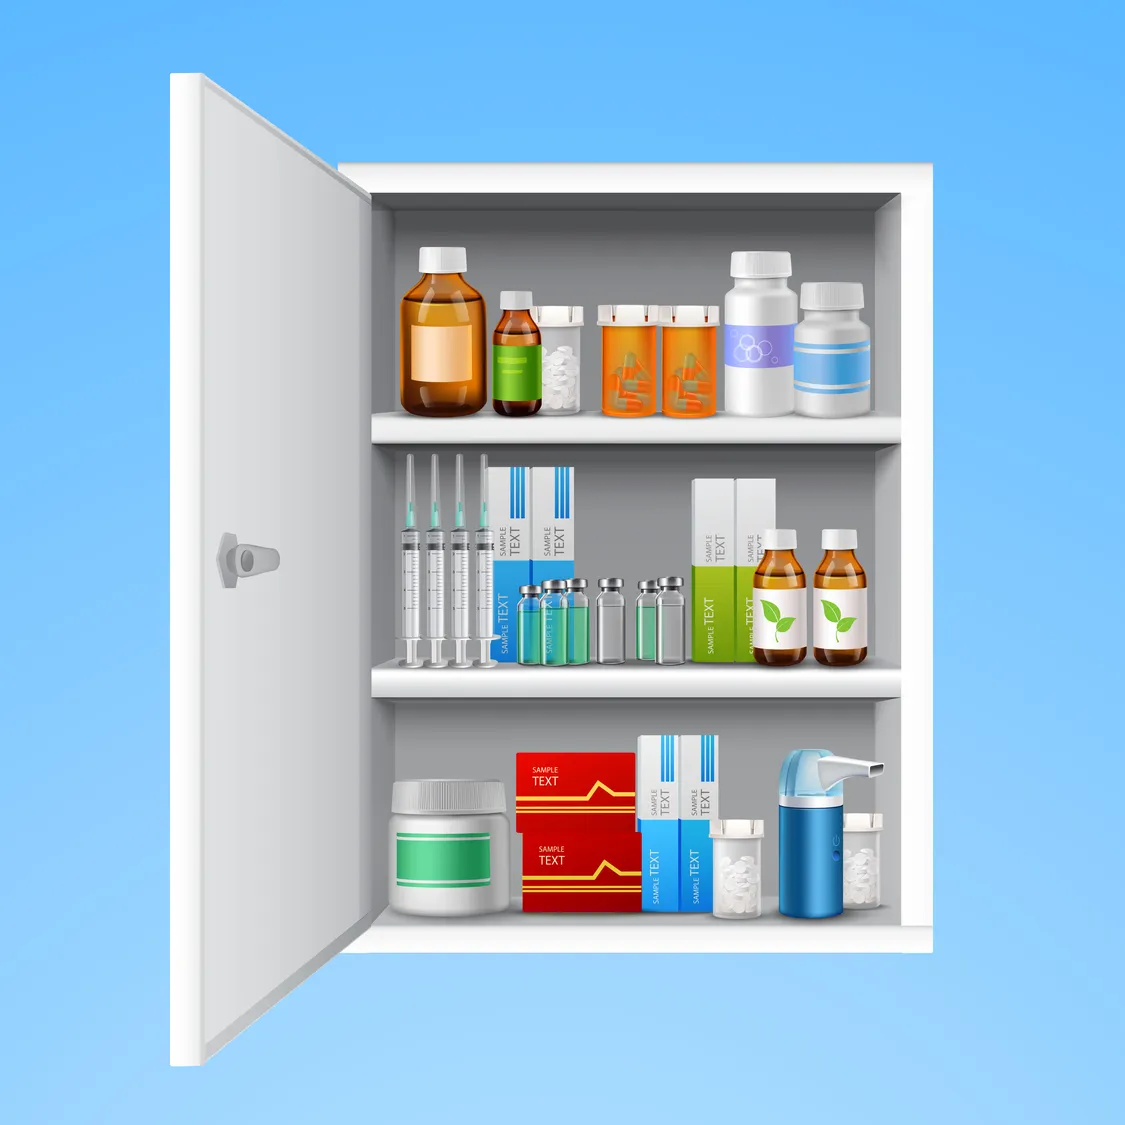 A medicine cabinet - is the worst enemy you can find for chronic patients!